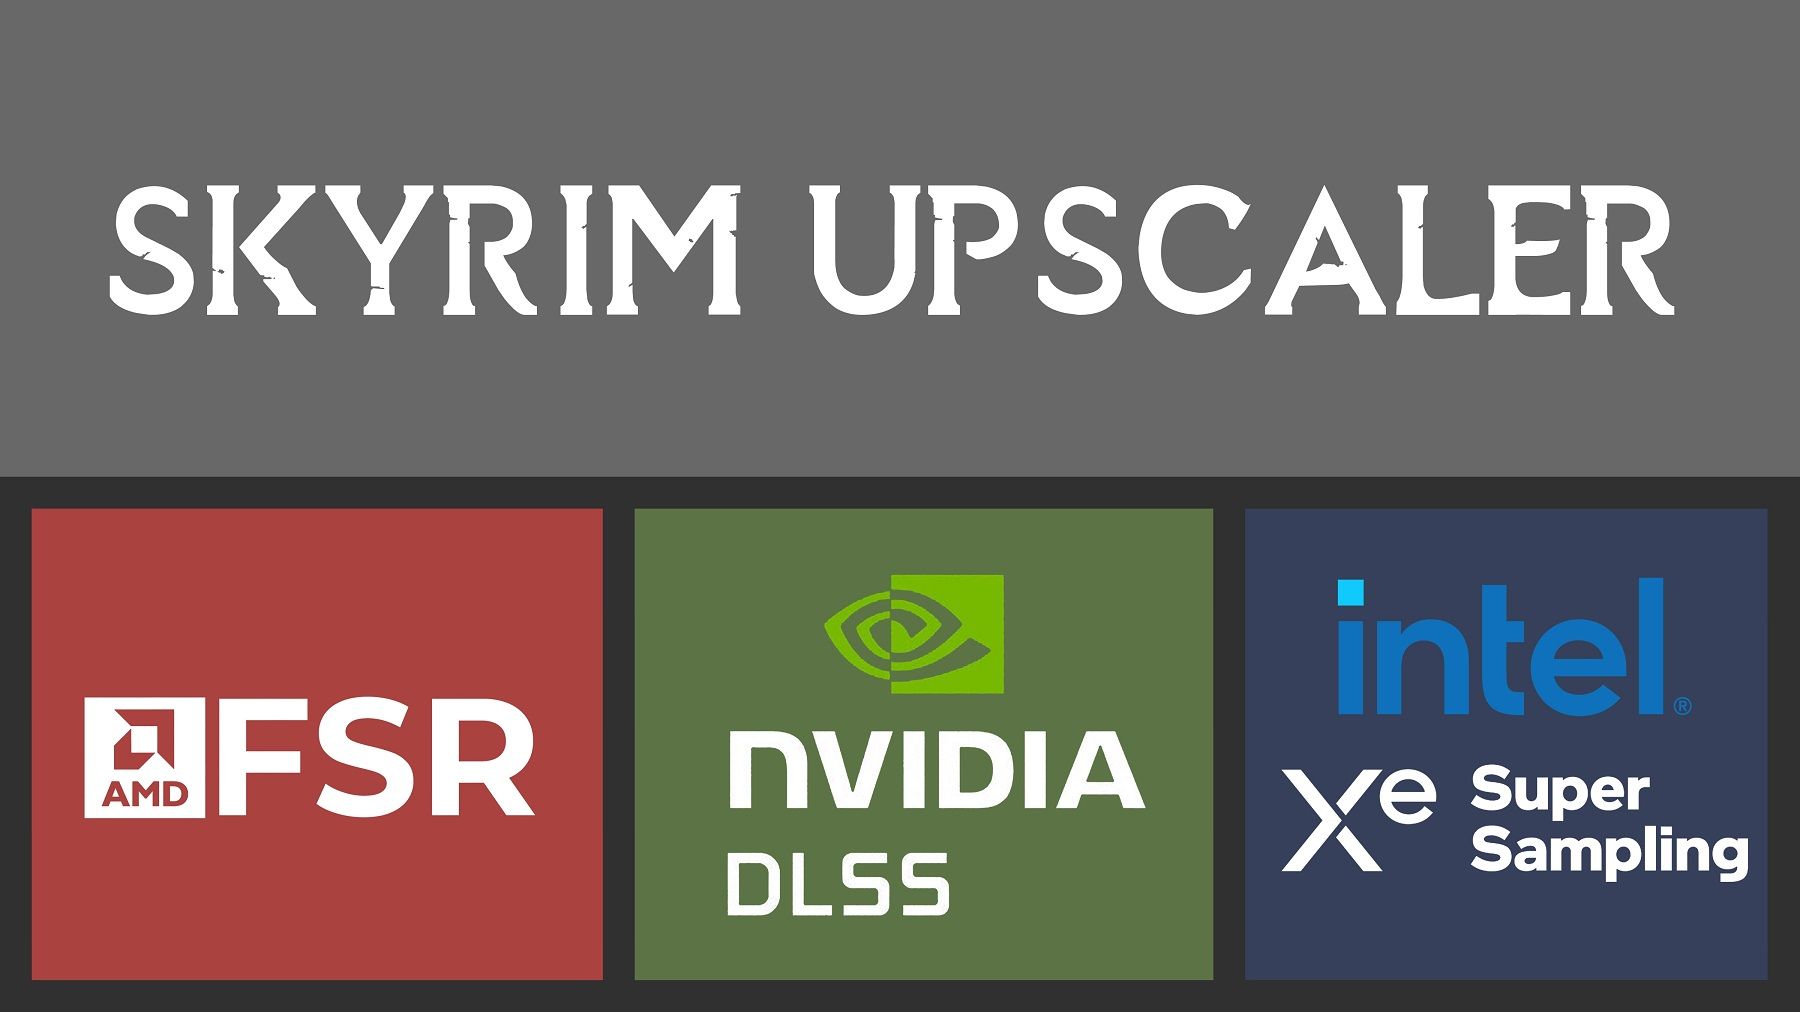 An image that says "Skyrim Upscaler" and has the logos for AMD's FSR, Nvidia's DLSS, and Intel's XeSS.